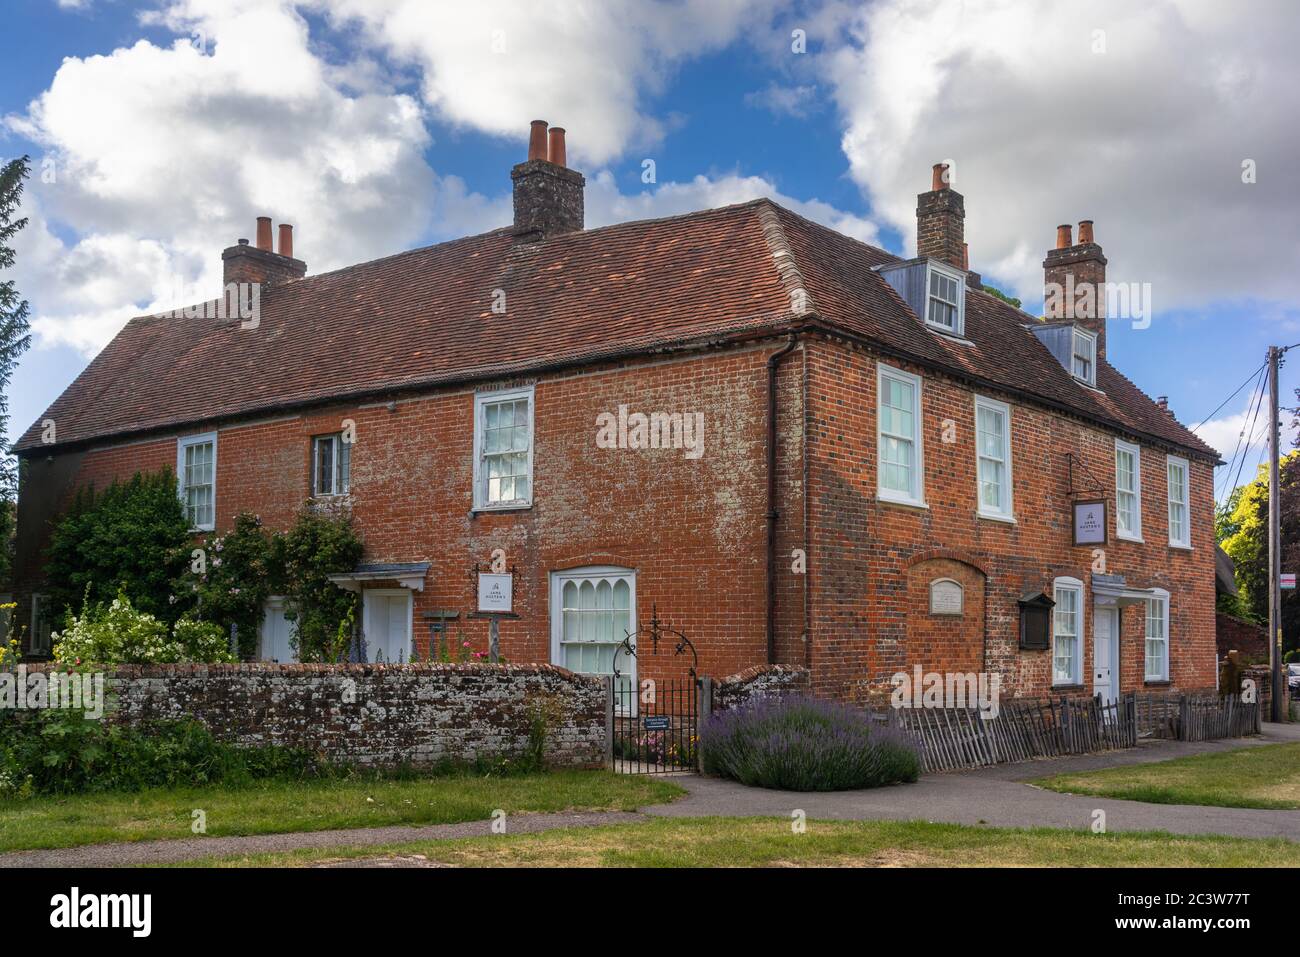 Jane Austen’s House - a Grade I listed building where Jane Austen lived most of her life, located in the picturesque village of Chawton, England, UK Stock Photo